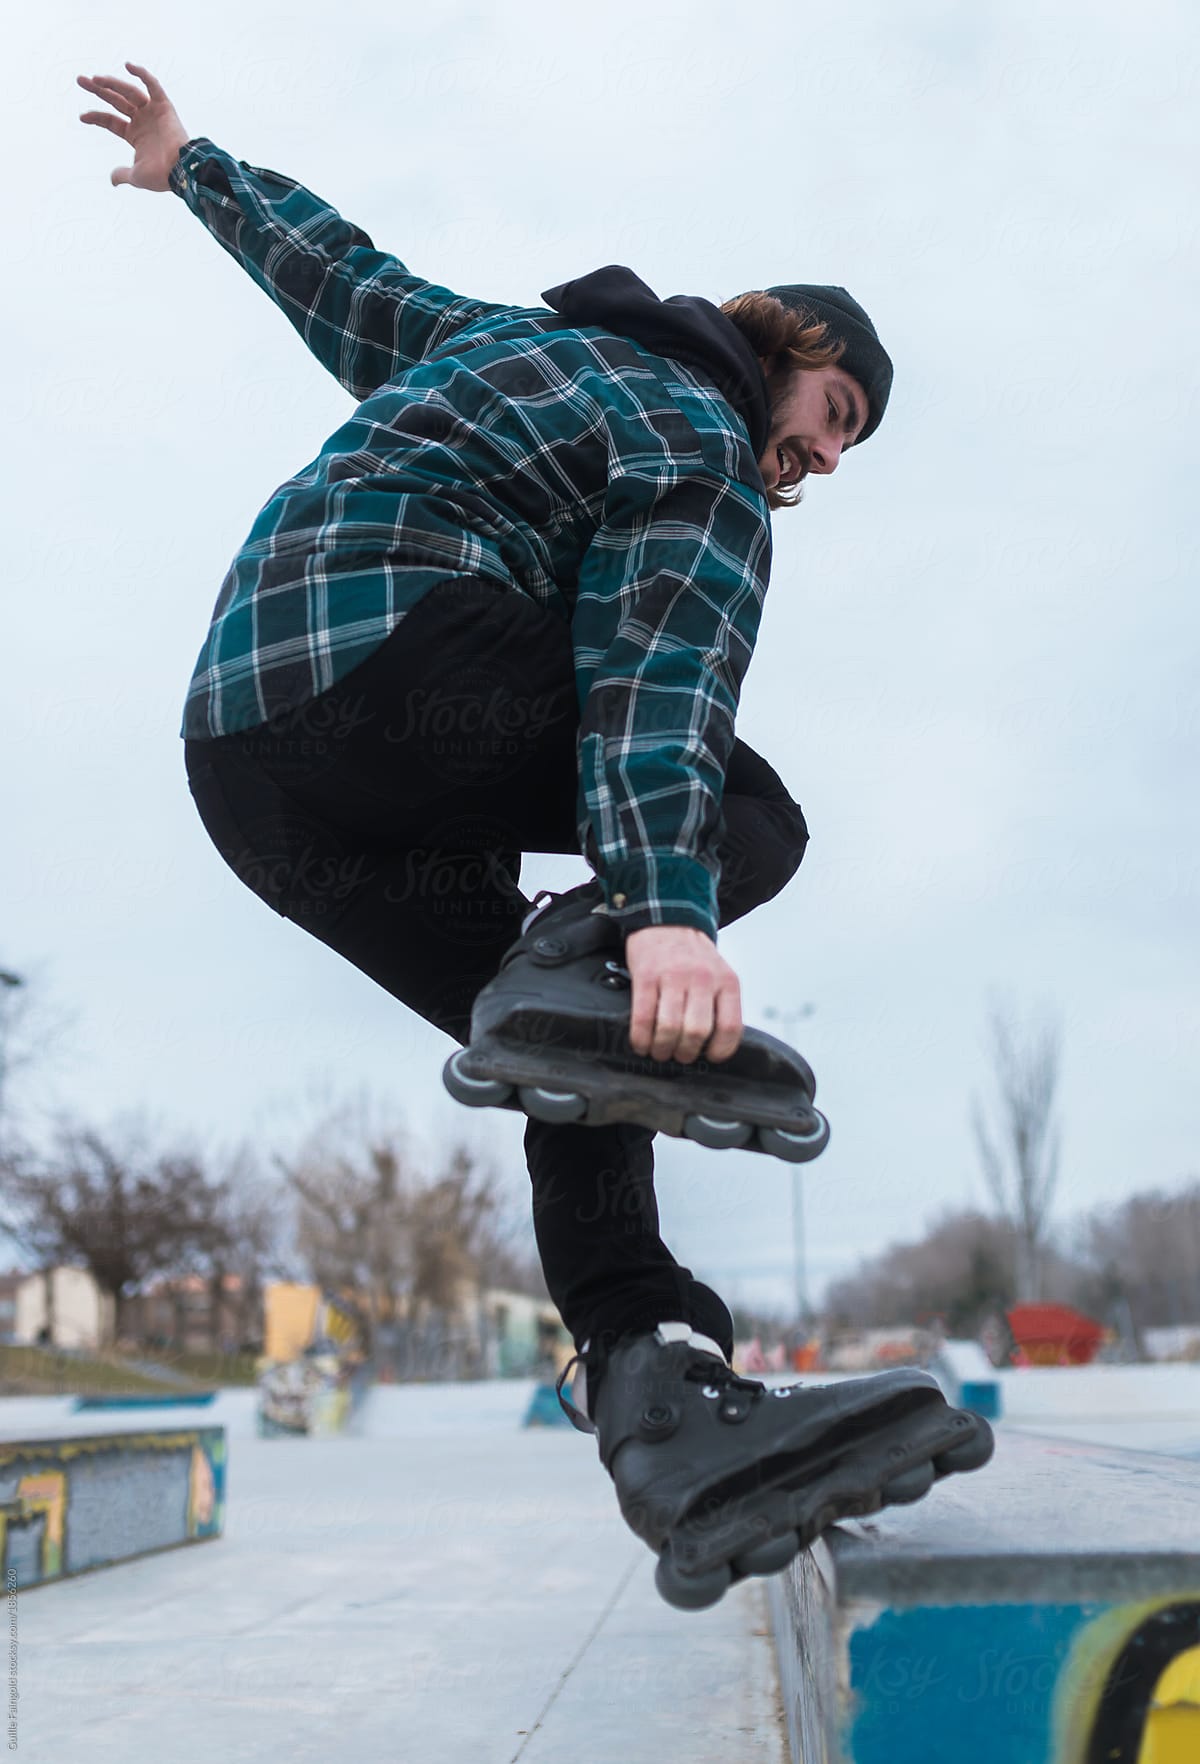 Cool man doing jump in rollerblades